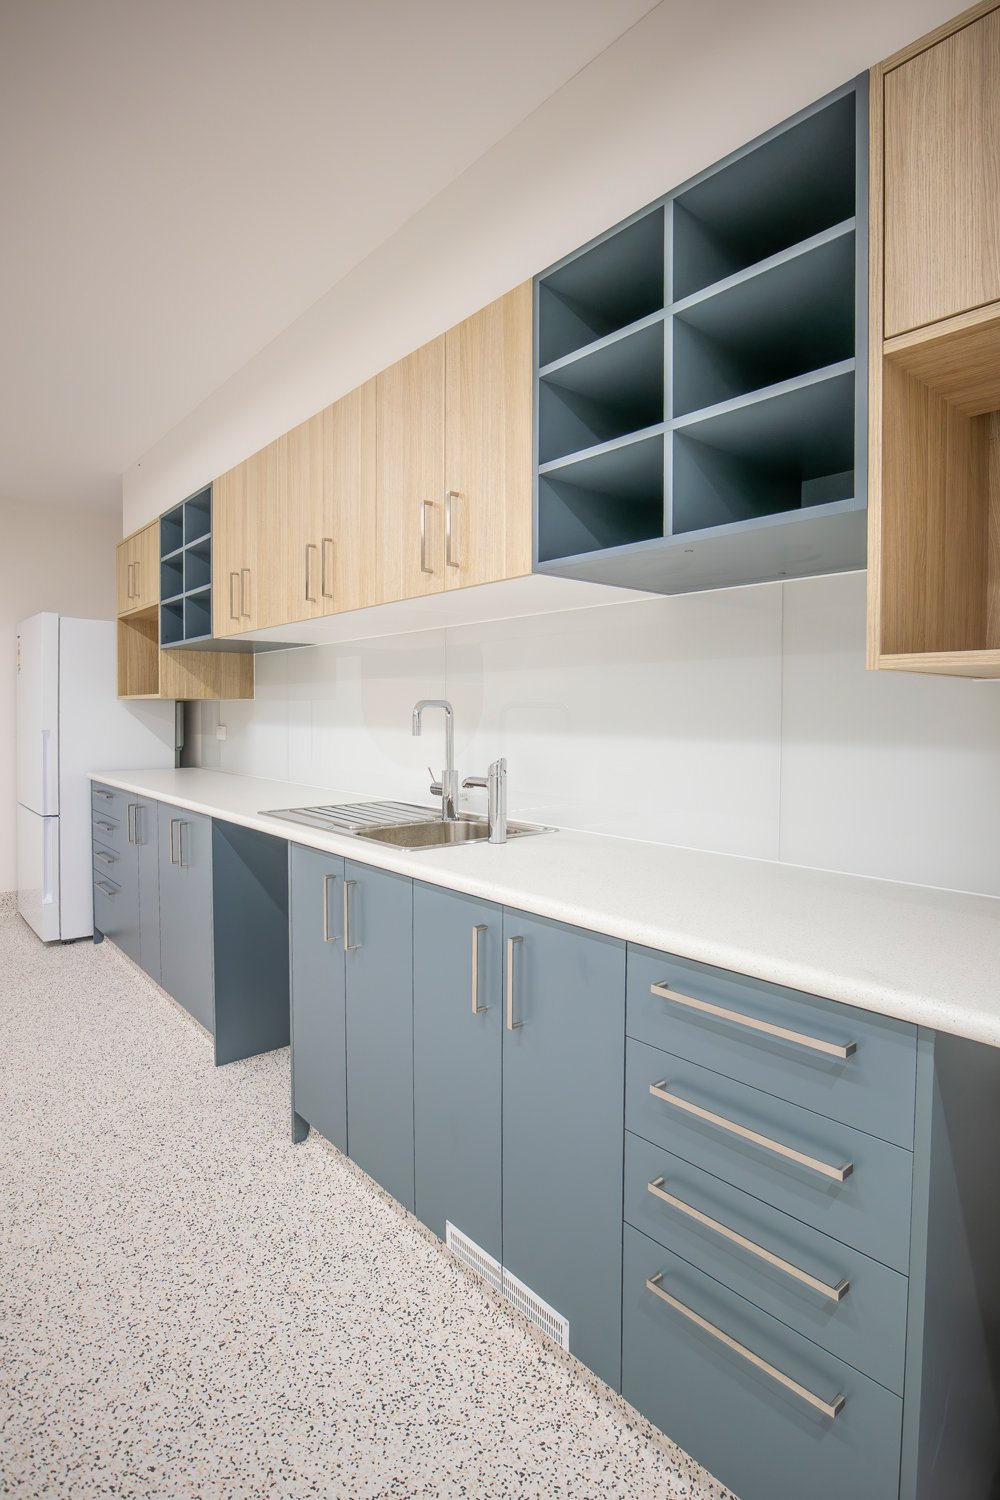 Monarch-CAMHS-kitchen-joinery.jpg